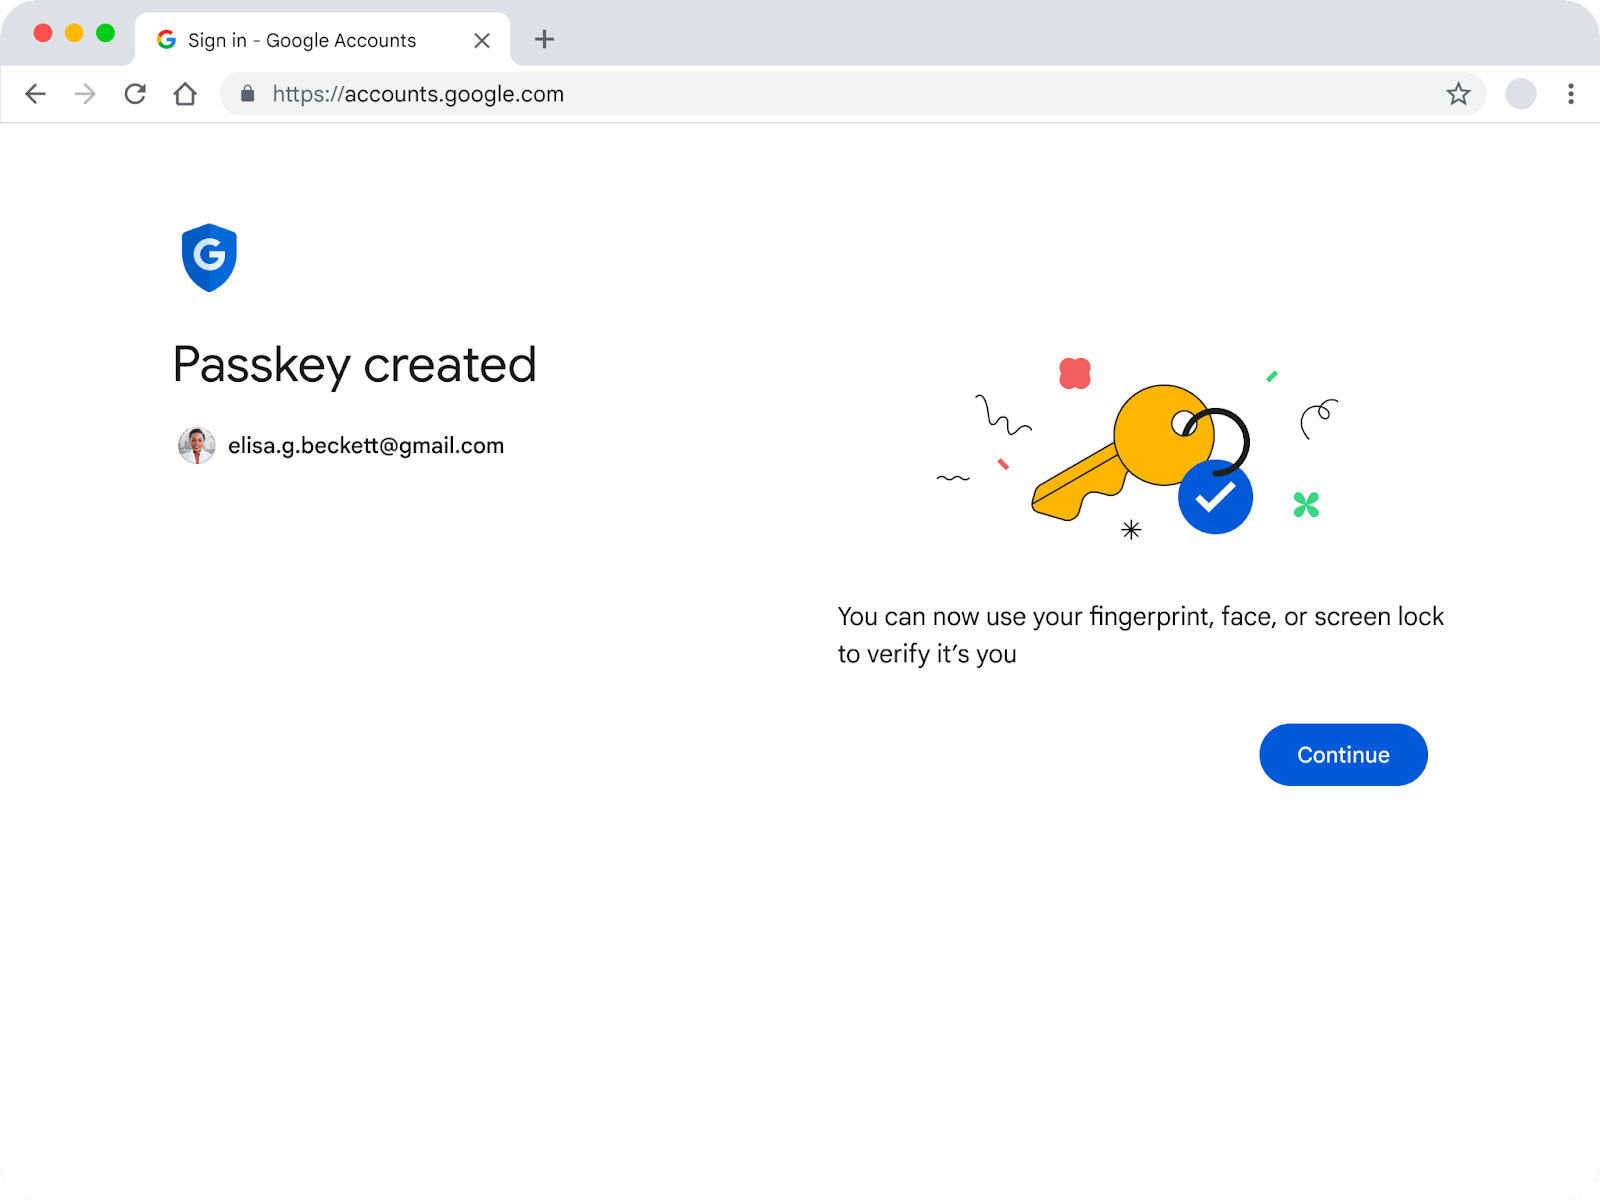 Once the passkey has been created, users will see this page